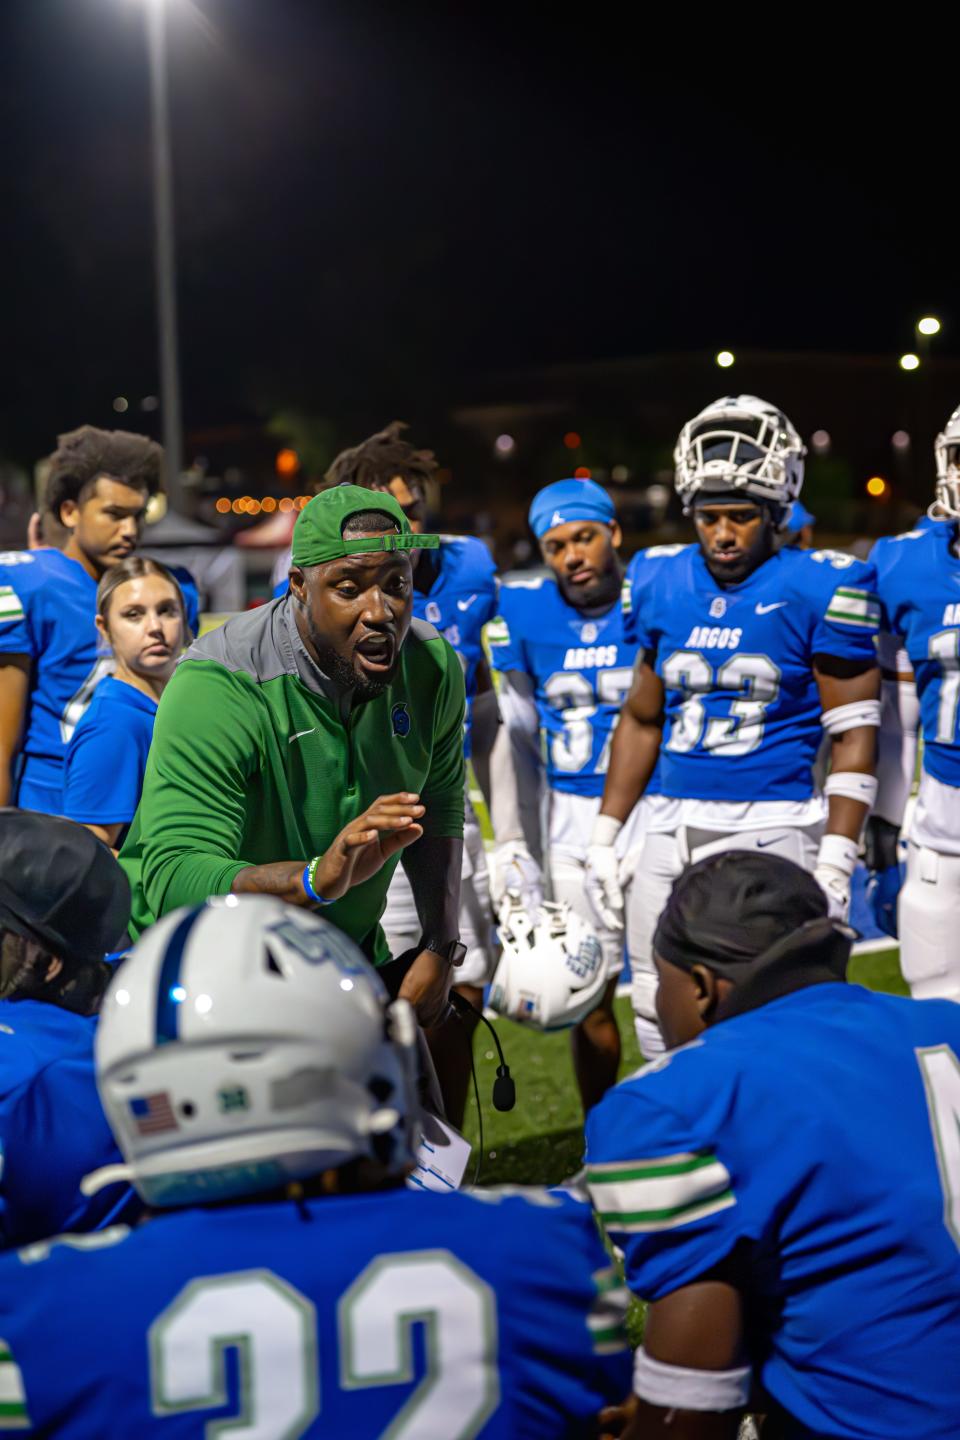 University of West Florida football coach Kavell Conner (green hat), the defensive coordinator for the team, talks to players during a recent game.